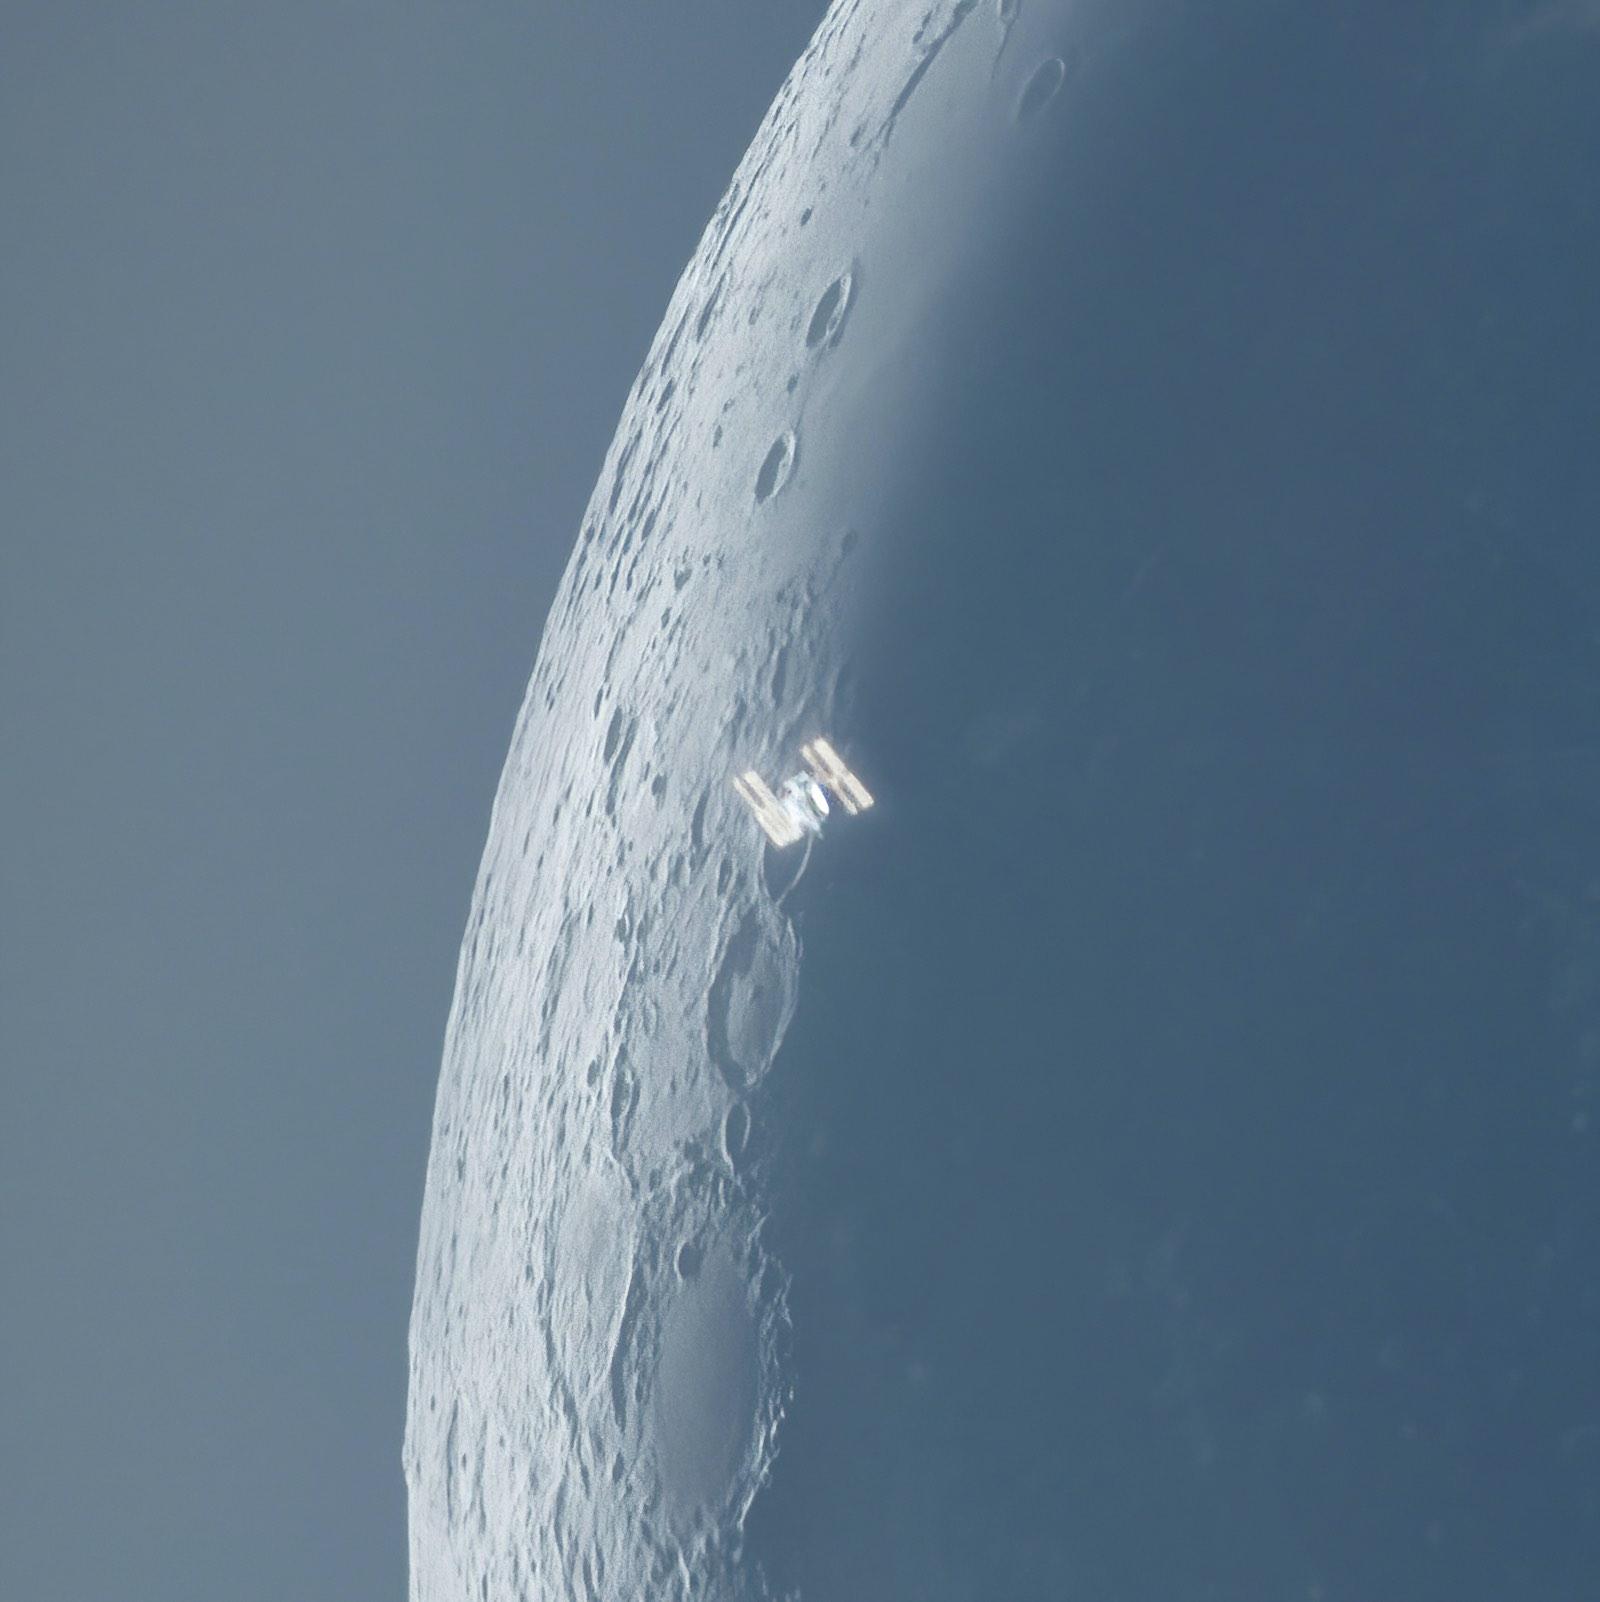 This atmospheric image shows the International Space Station (ISS) transiting a very slim waning crescent moon during broad daylight. The photographer used two cameras and two telescopes to capture a luminance frame including the ISS, and the scene in colour. The ISS transit was shot using RAW video with a monochrome camera, while a one-shot colour camera was simultaneously capturing shots to get the proper colours. Then the two images were blended together to complete the scene.